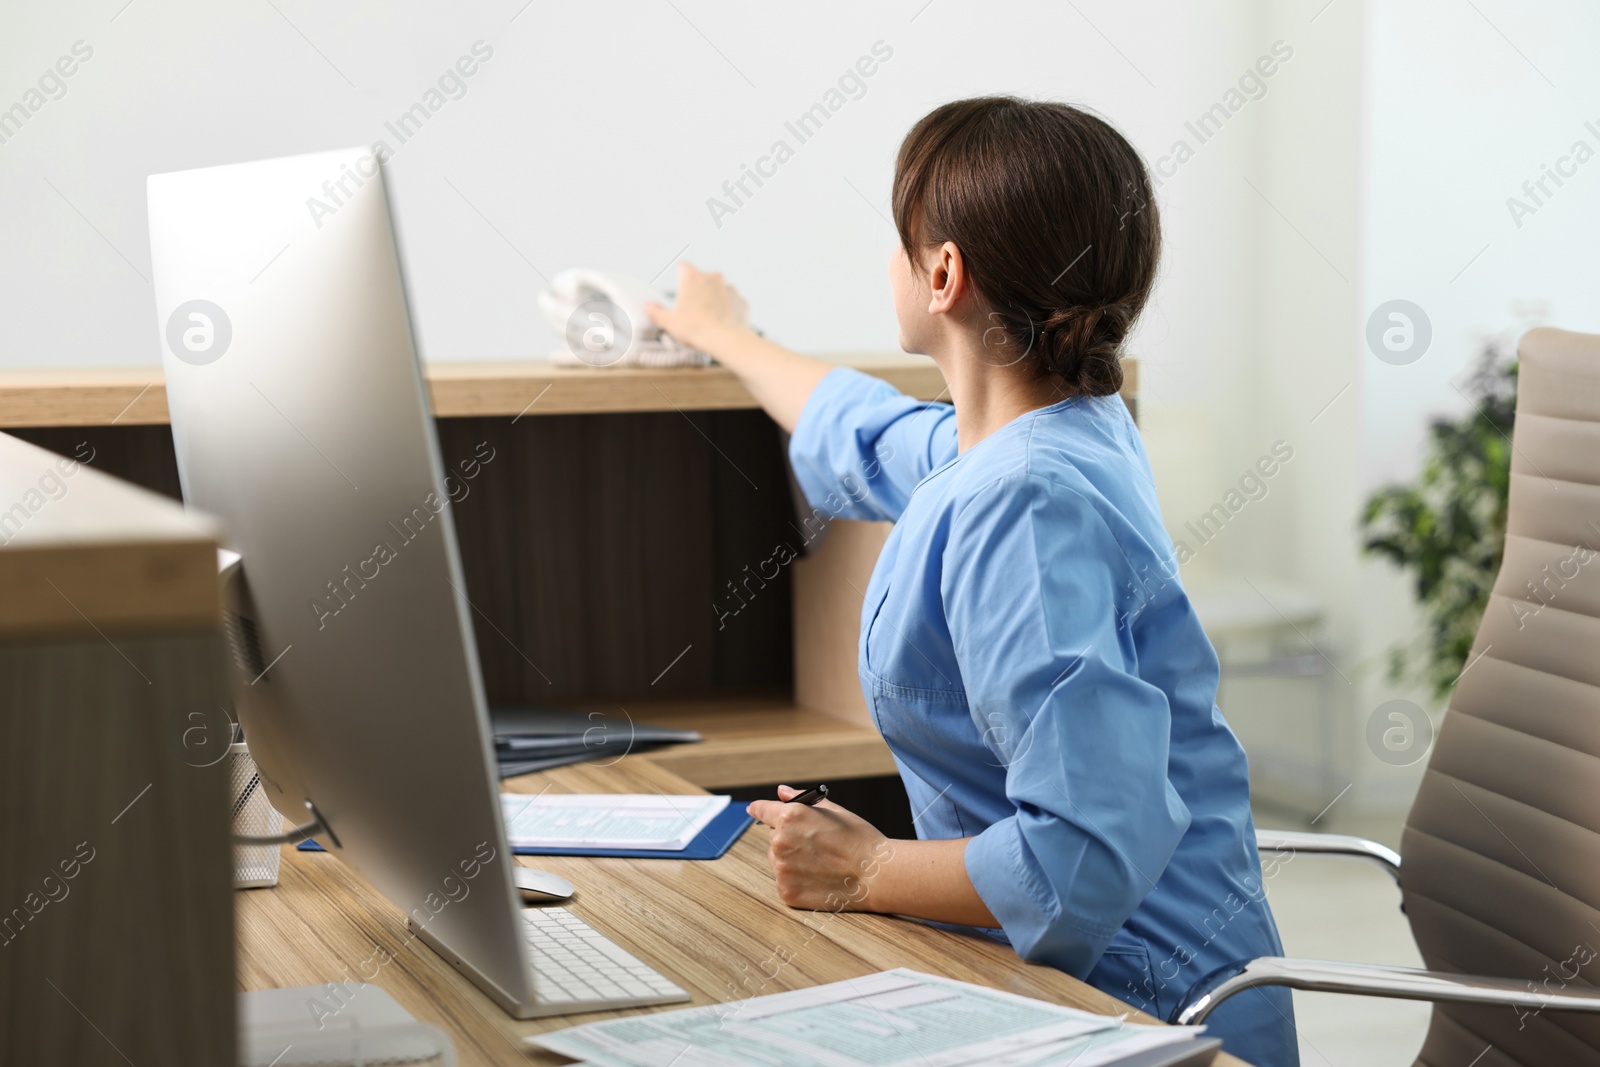 Photo of Medical assistant reaching for phone in office